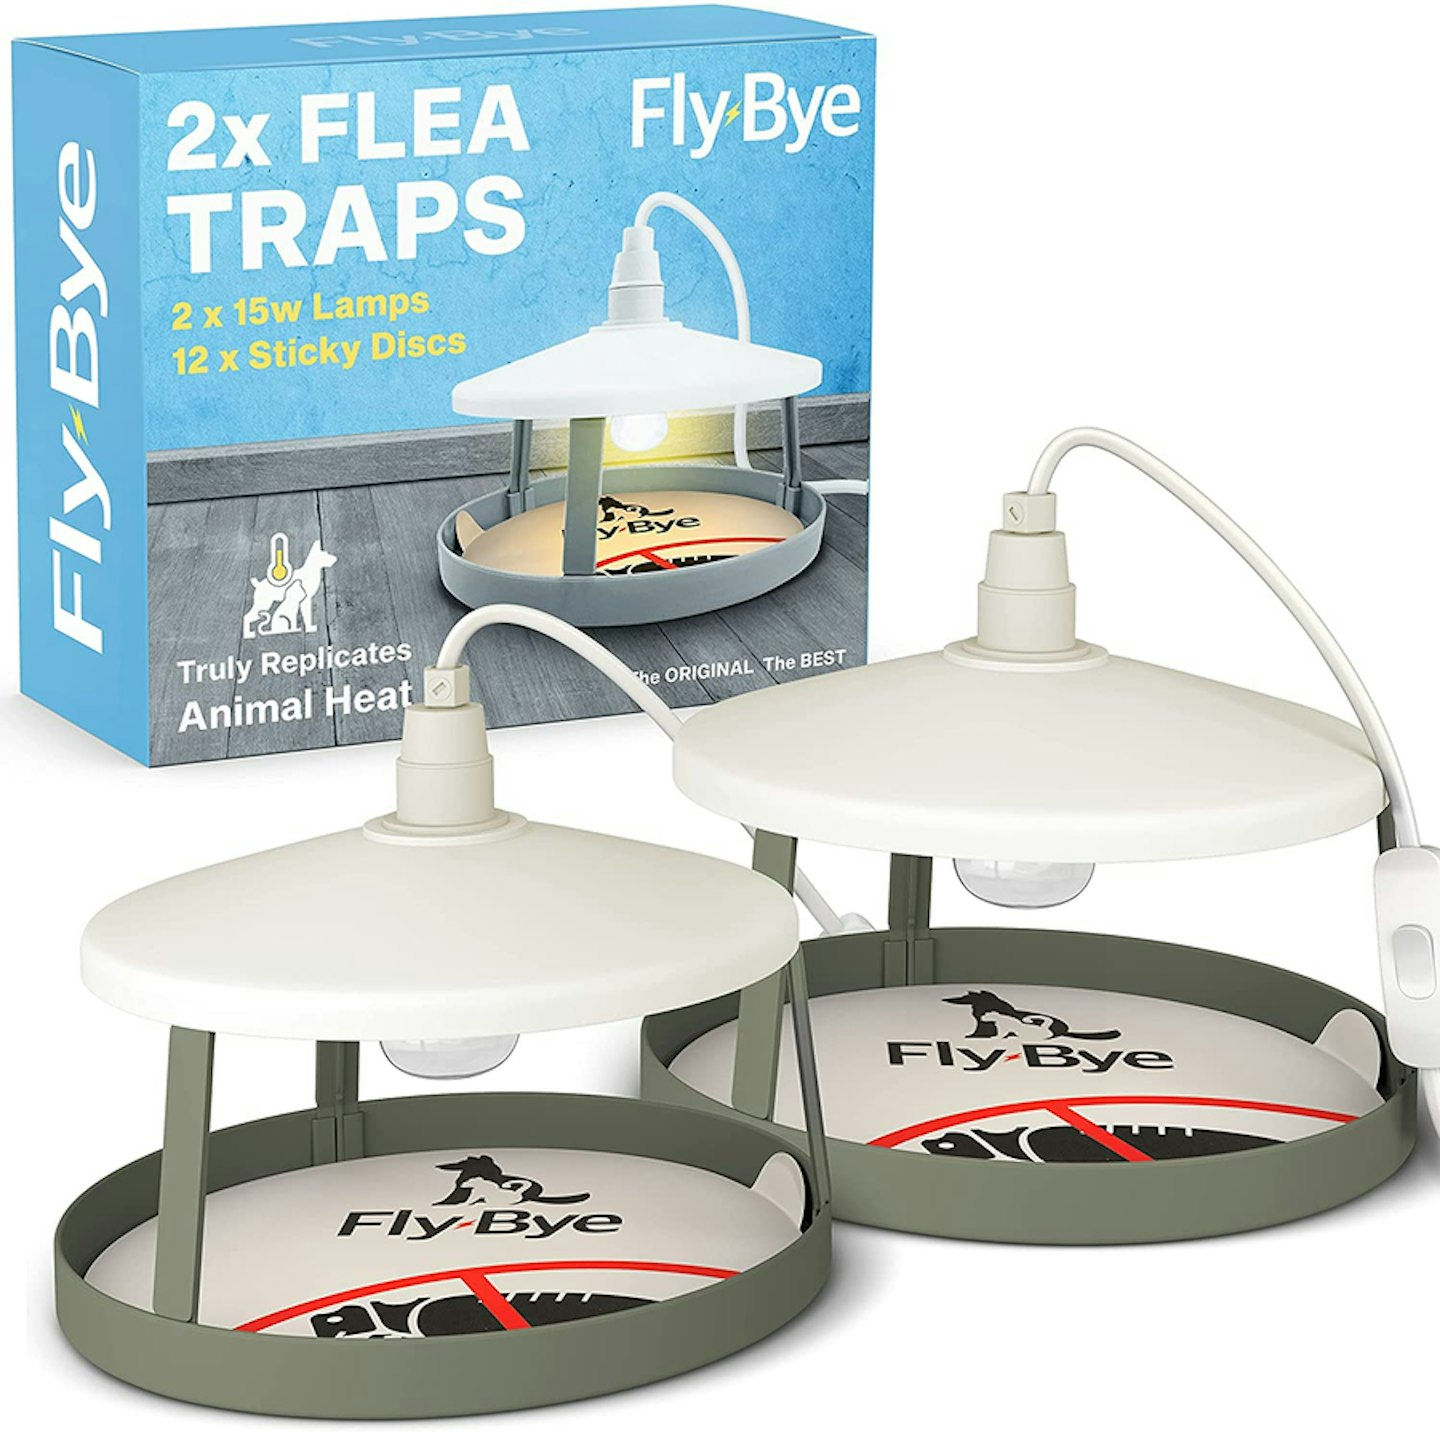 Fly-Bye 2x Ultimate Flea Traps with 12 Sticky Discs